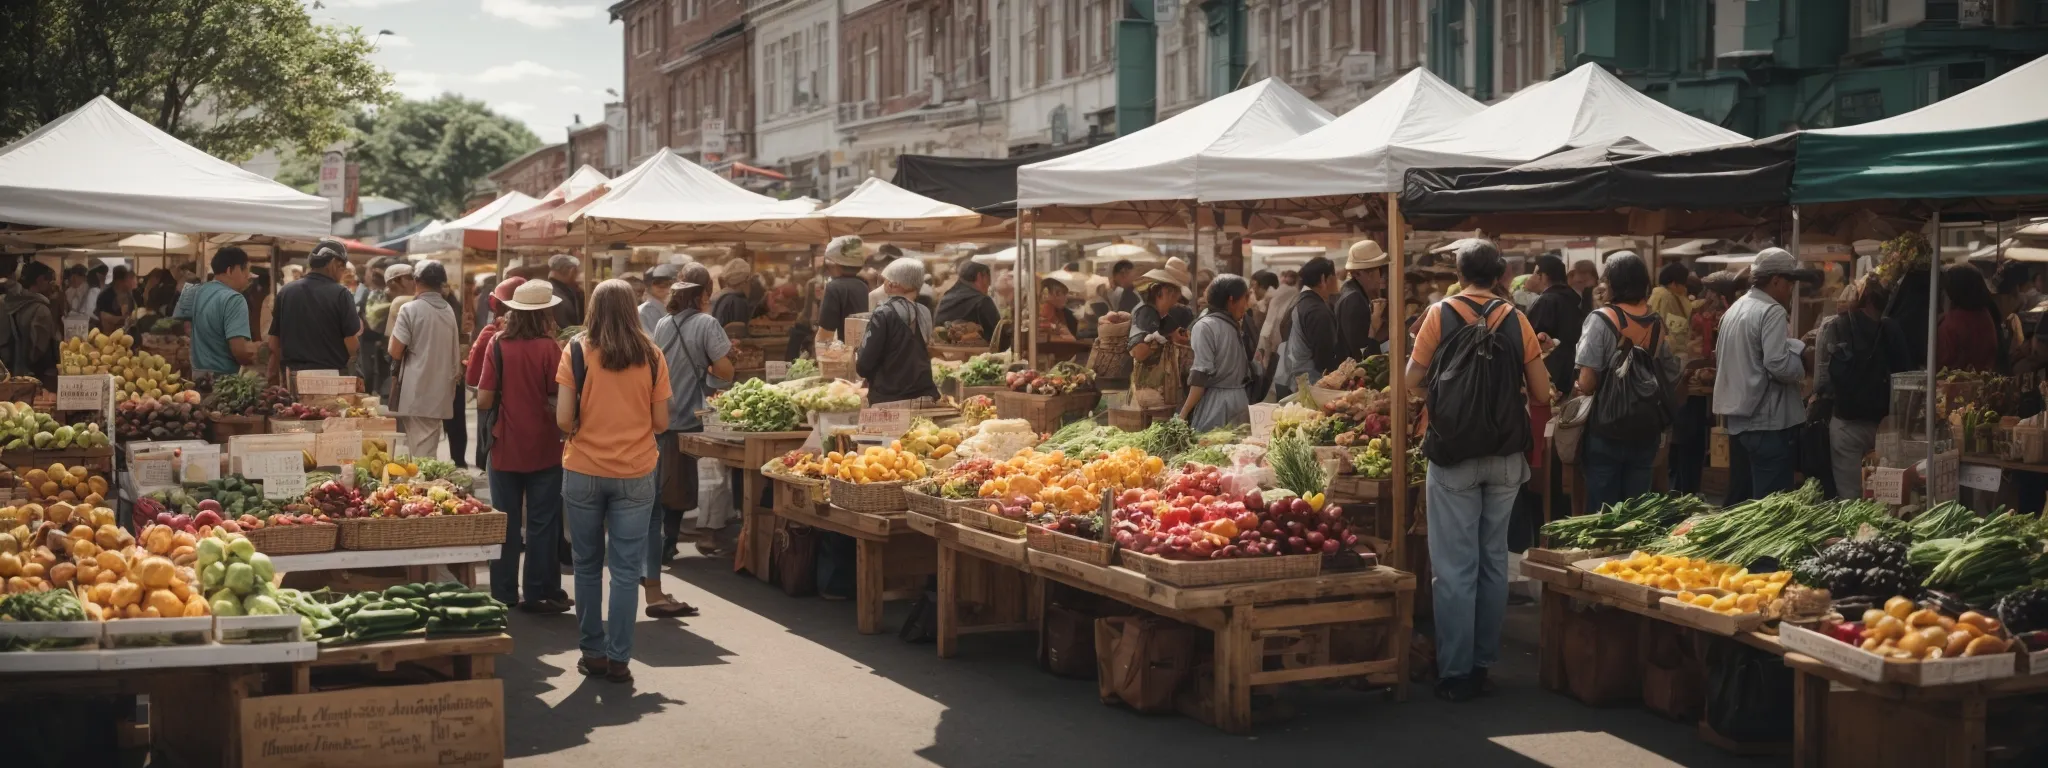 a bustling farmers' market with vibrant stalls offering an array of fresh, local produce to a community of engaged shoppers.